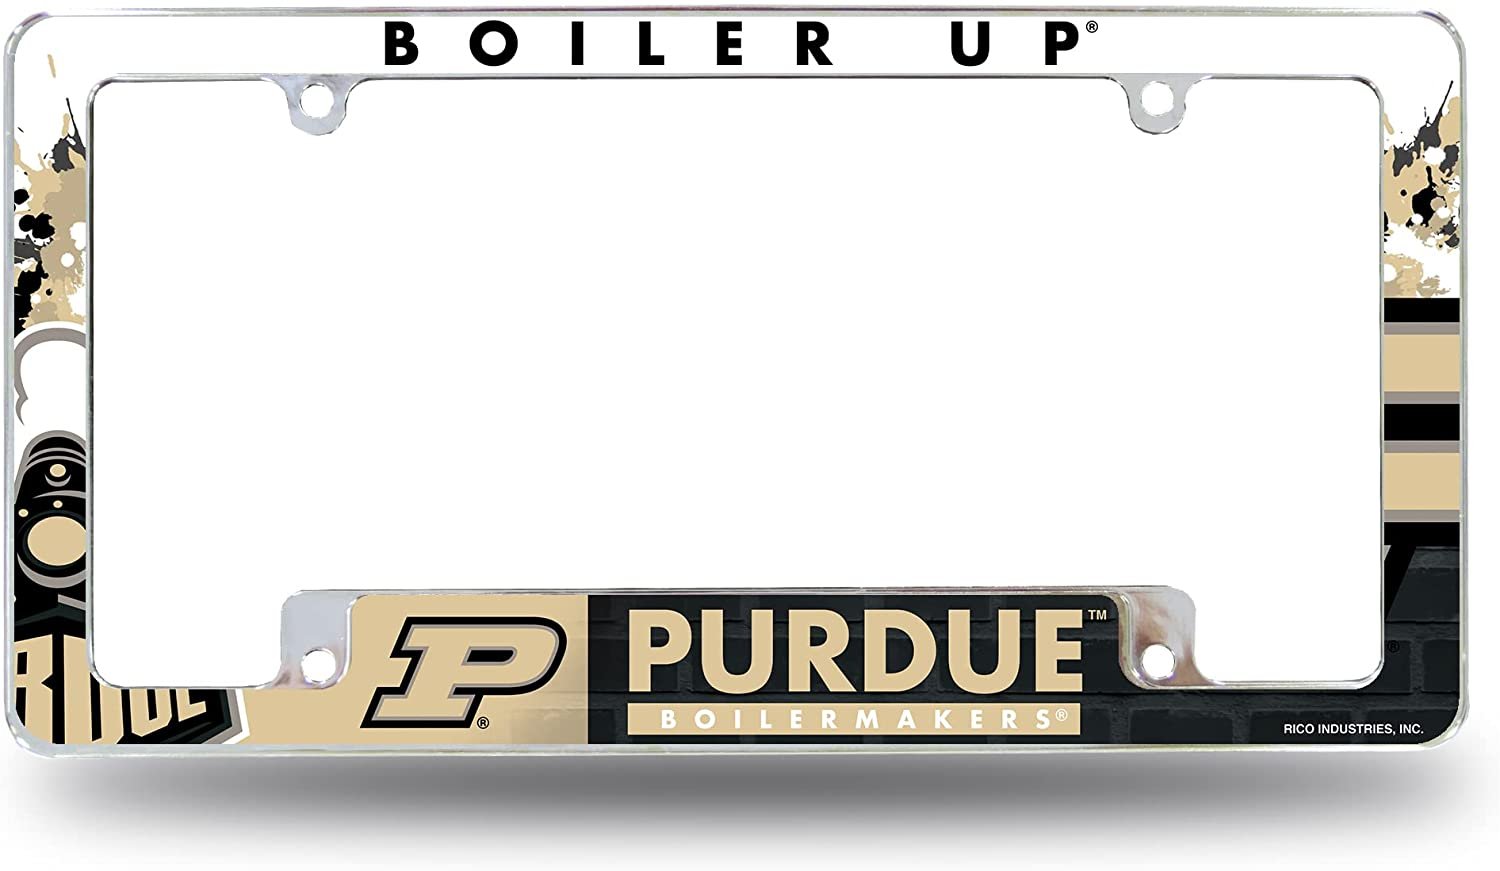 Purdue Boilermakers Metal License Plate Frame Tag Cover All Over Design University